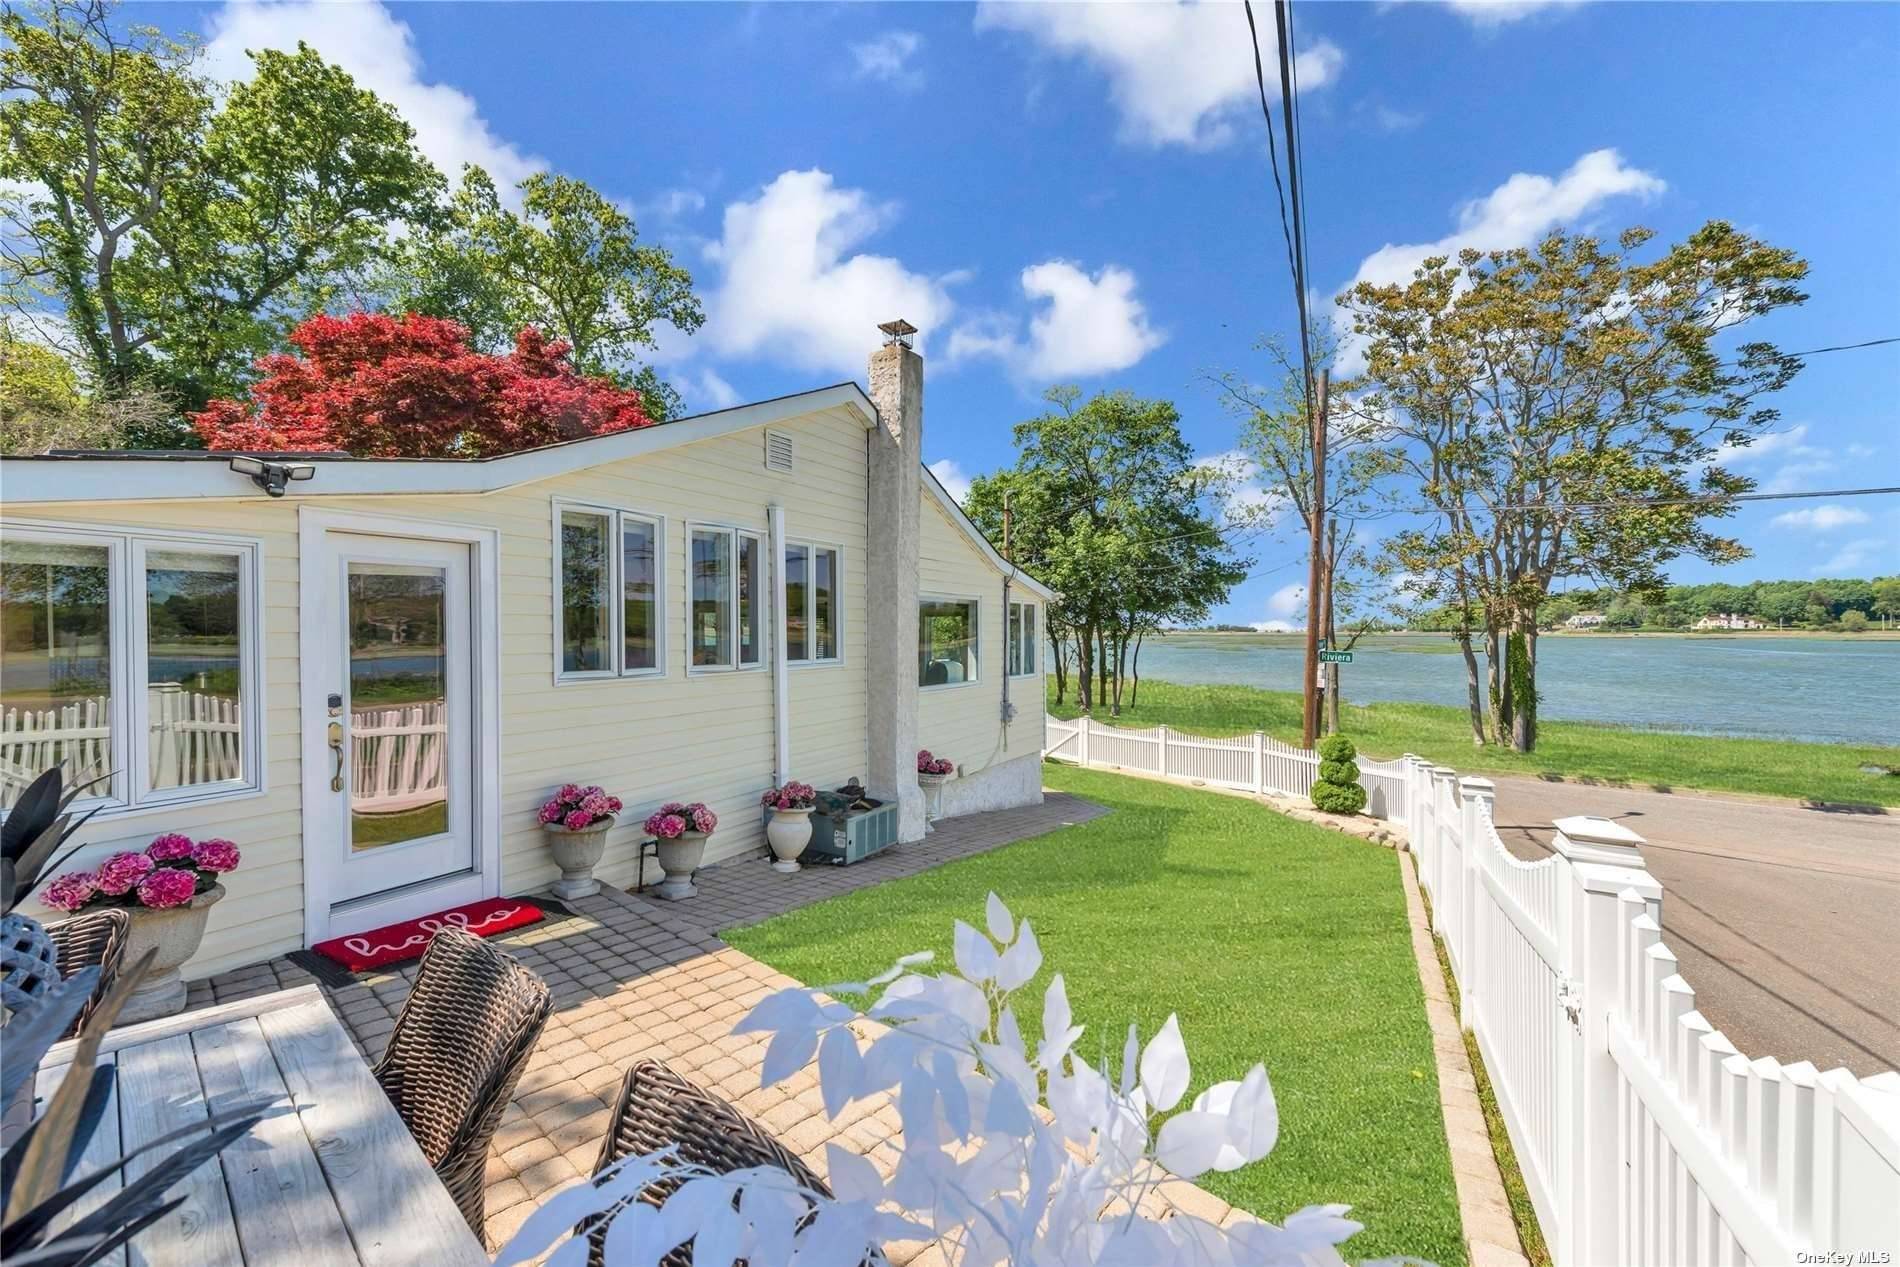 Discover Your Perfect Retreat While Enjoying San Remo Sunsets At This Waterfront on The Nissequogue Home With Spectacular 180' Views Of Long Island Sound.